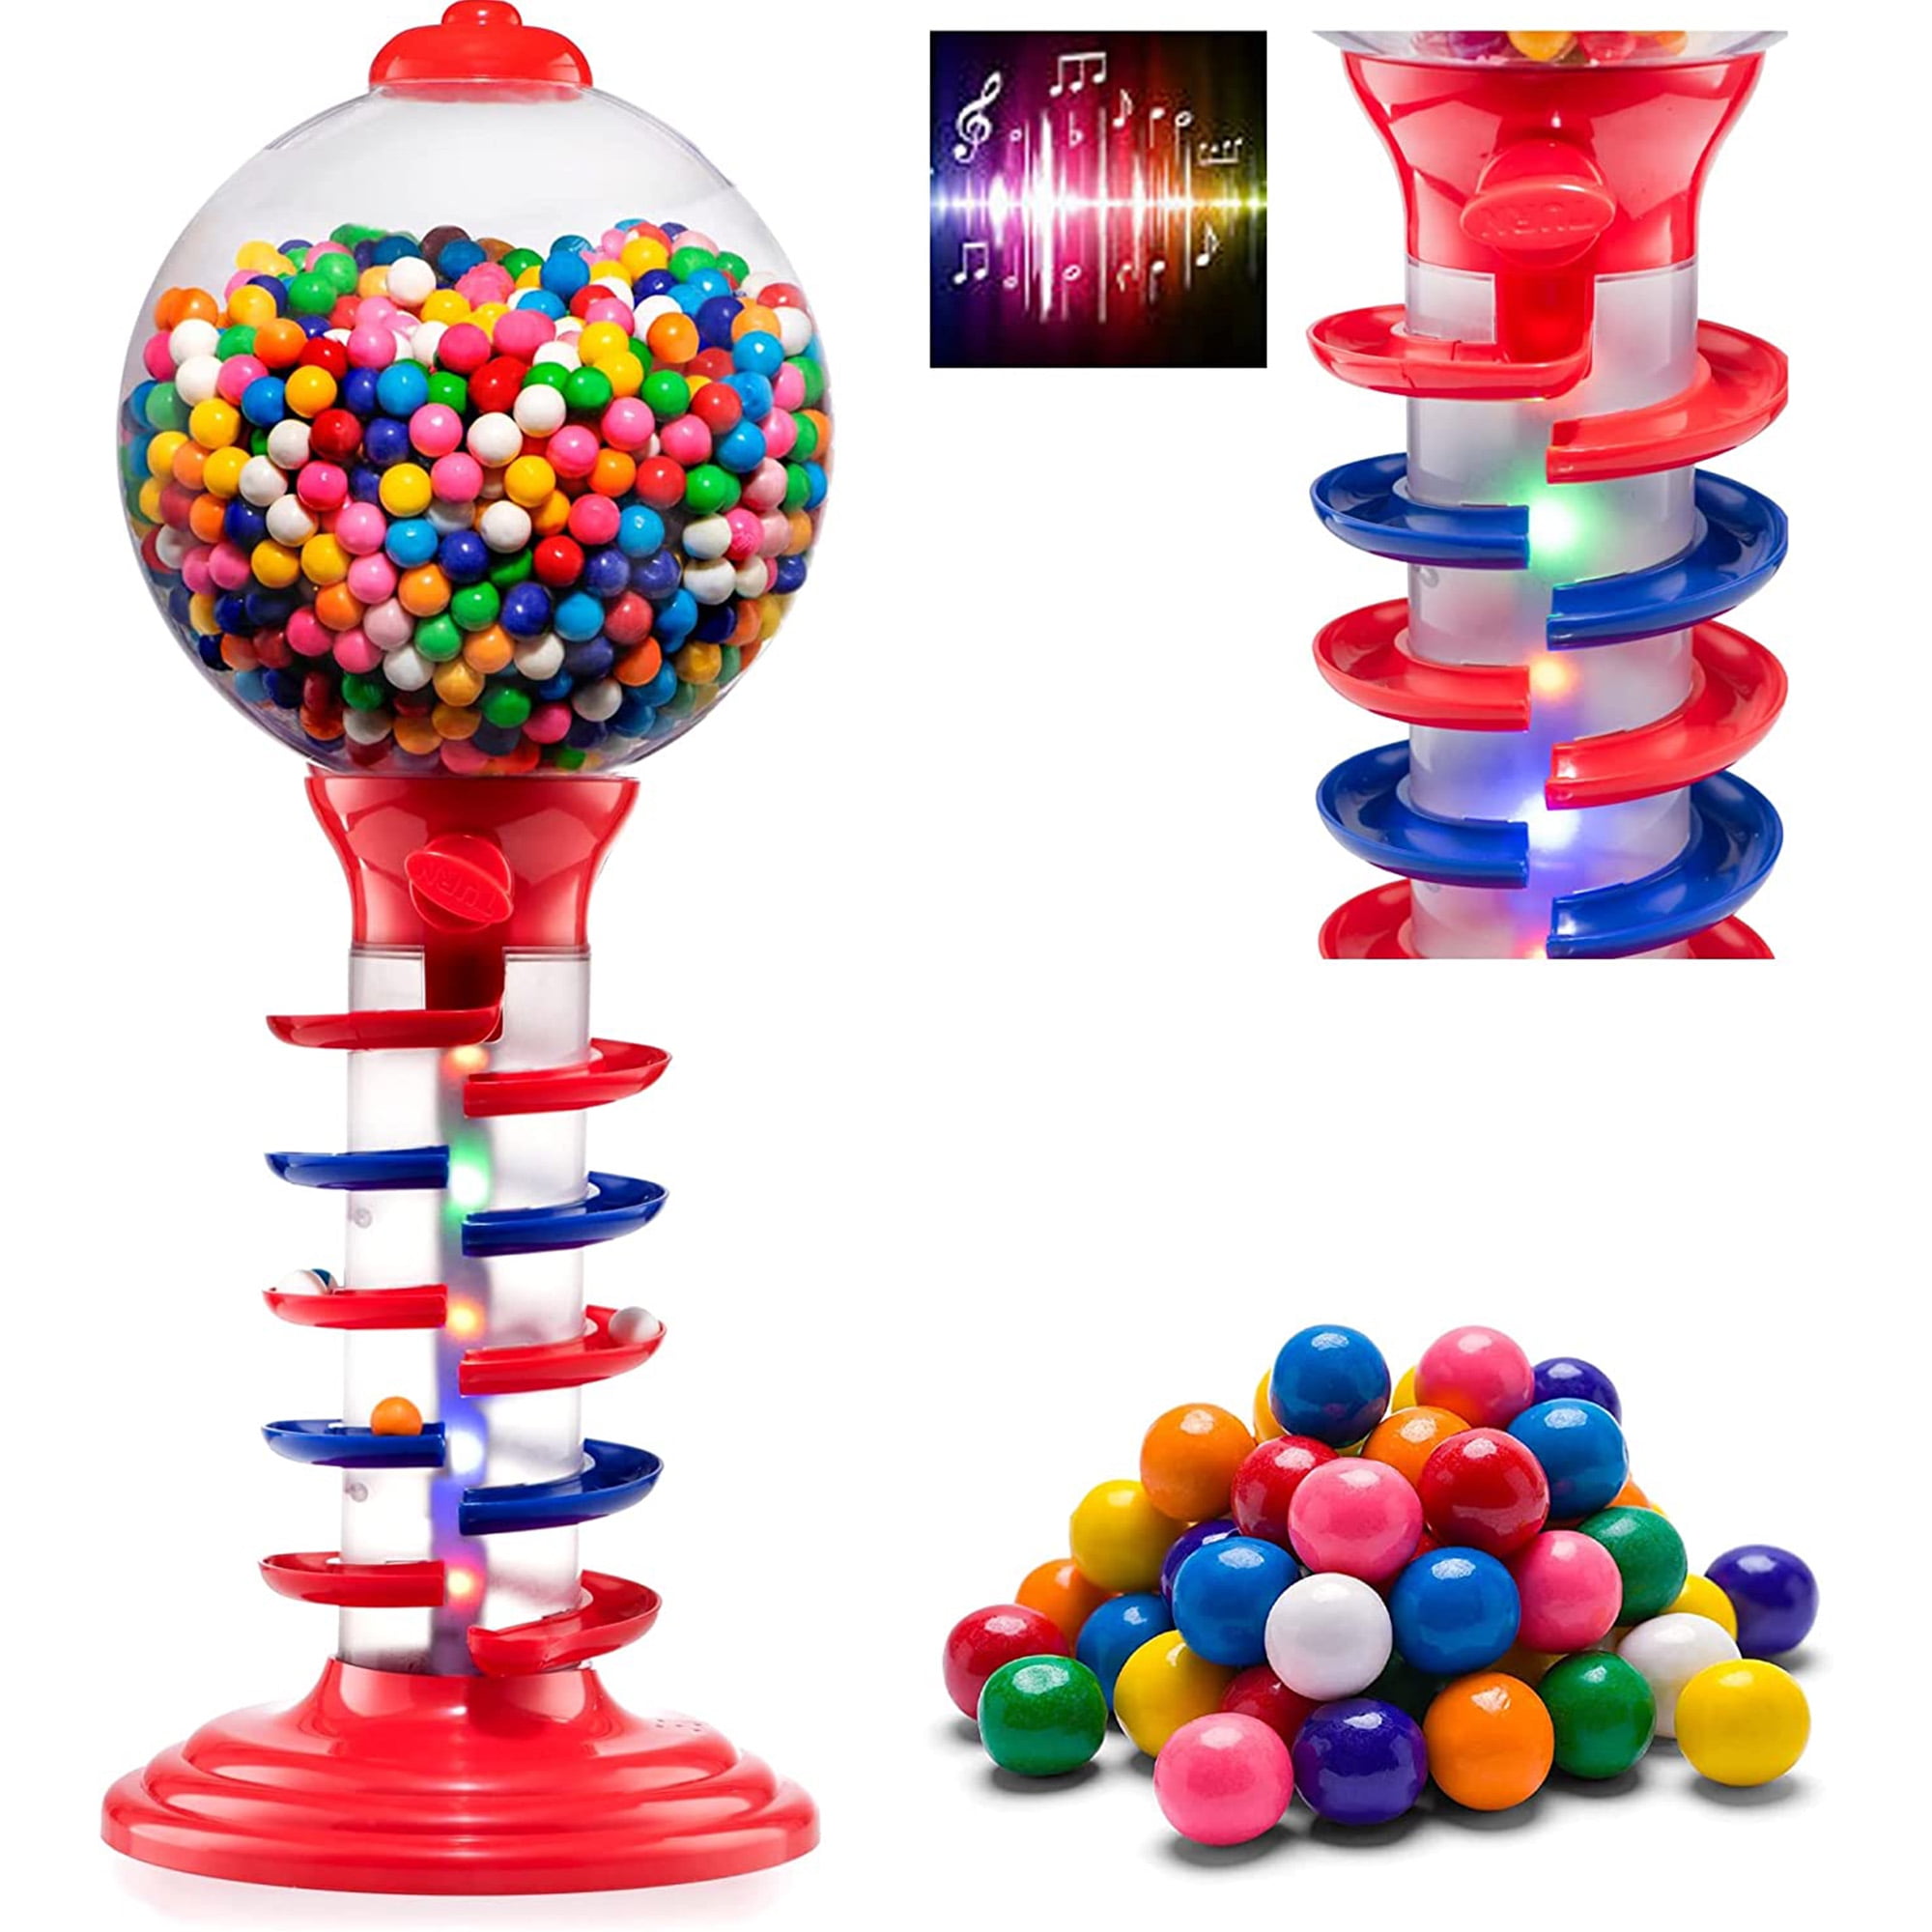 Playo 10.5” Spiral Gumball Machine For Kids with 40 Pcs Bubble Gum, Red 